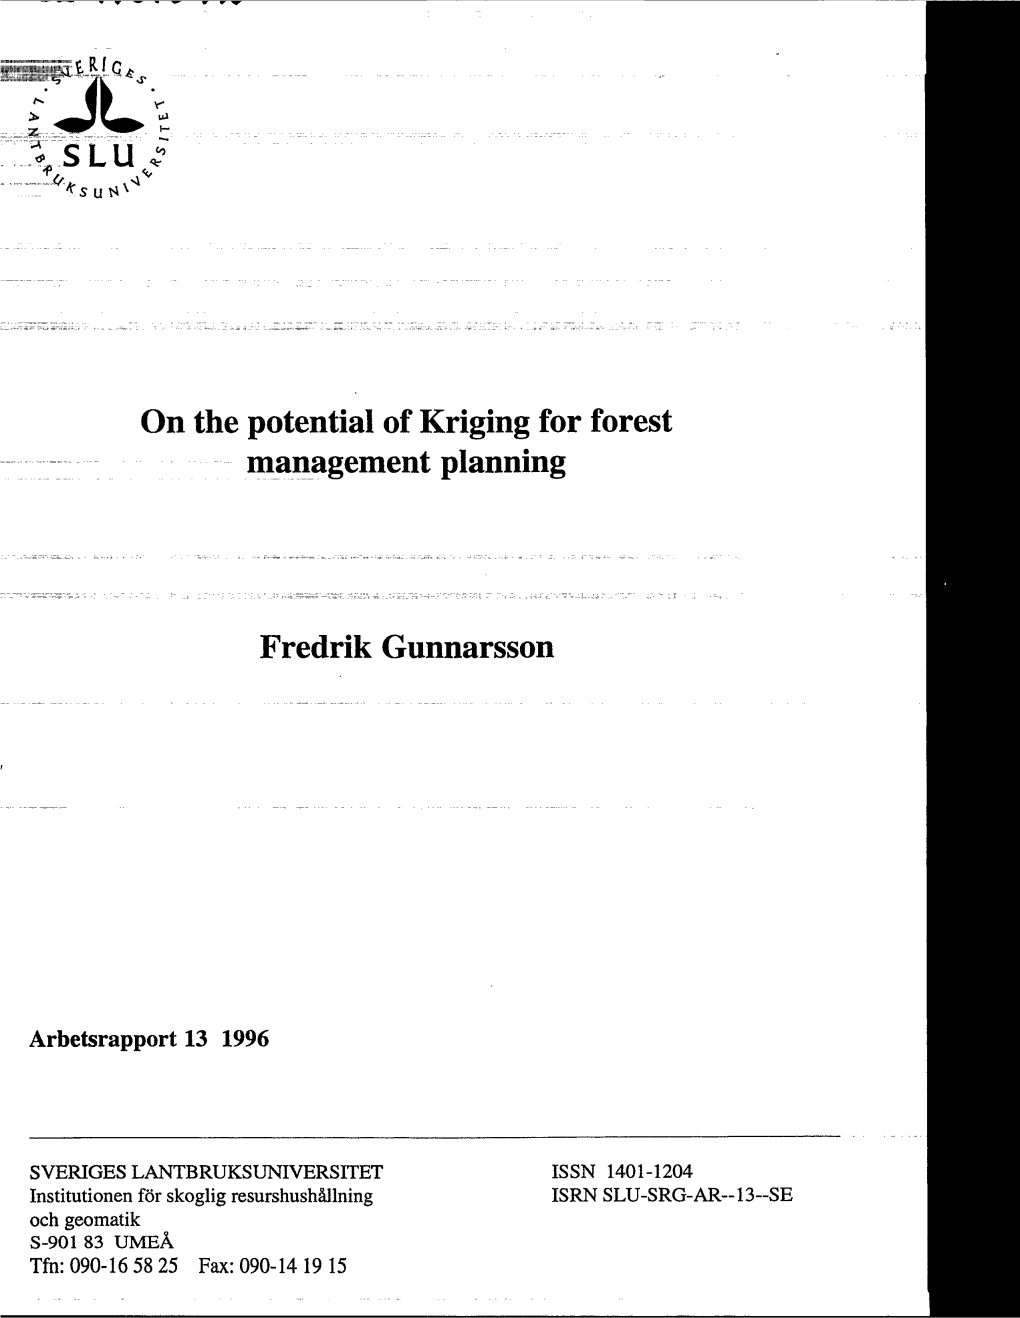 On the Potential of Kriging for Forest Management Planning